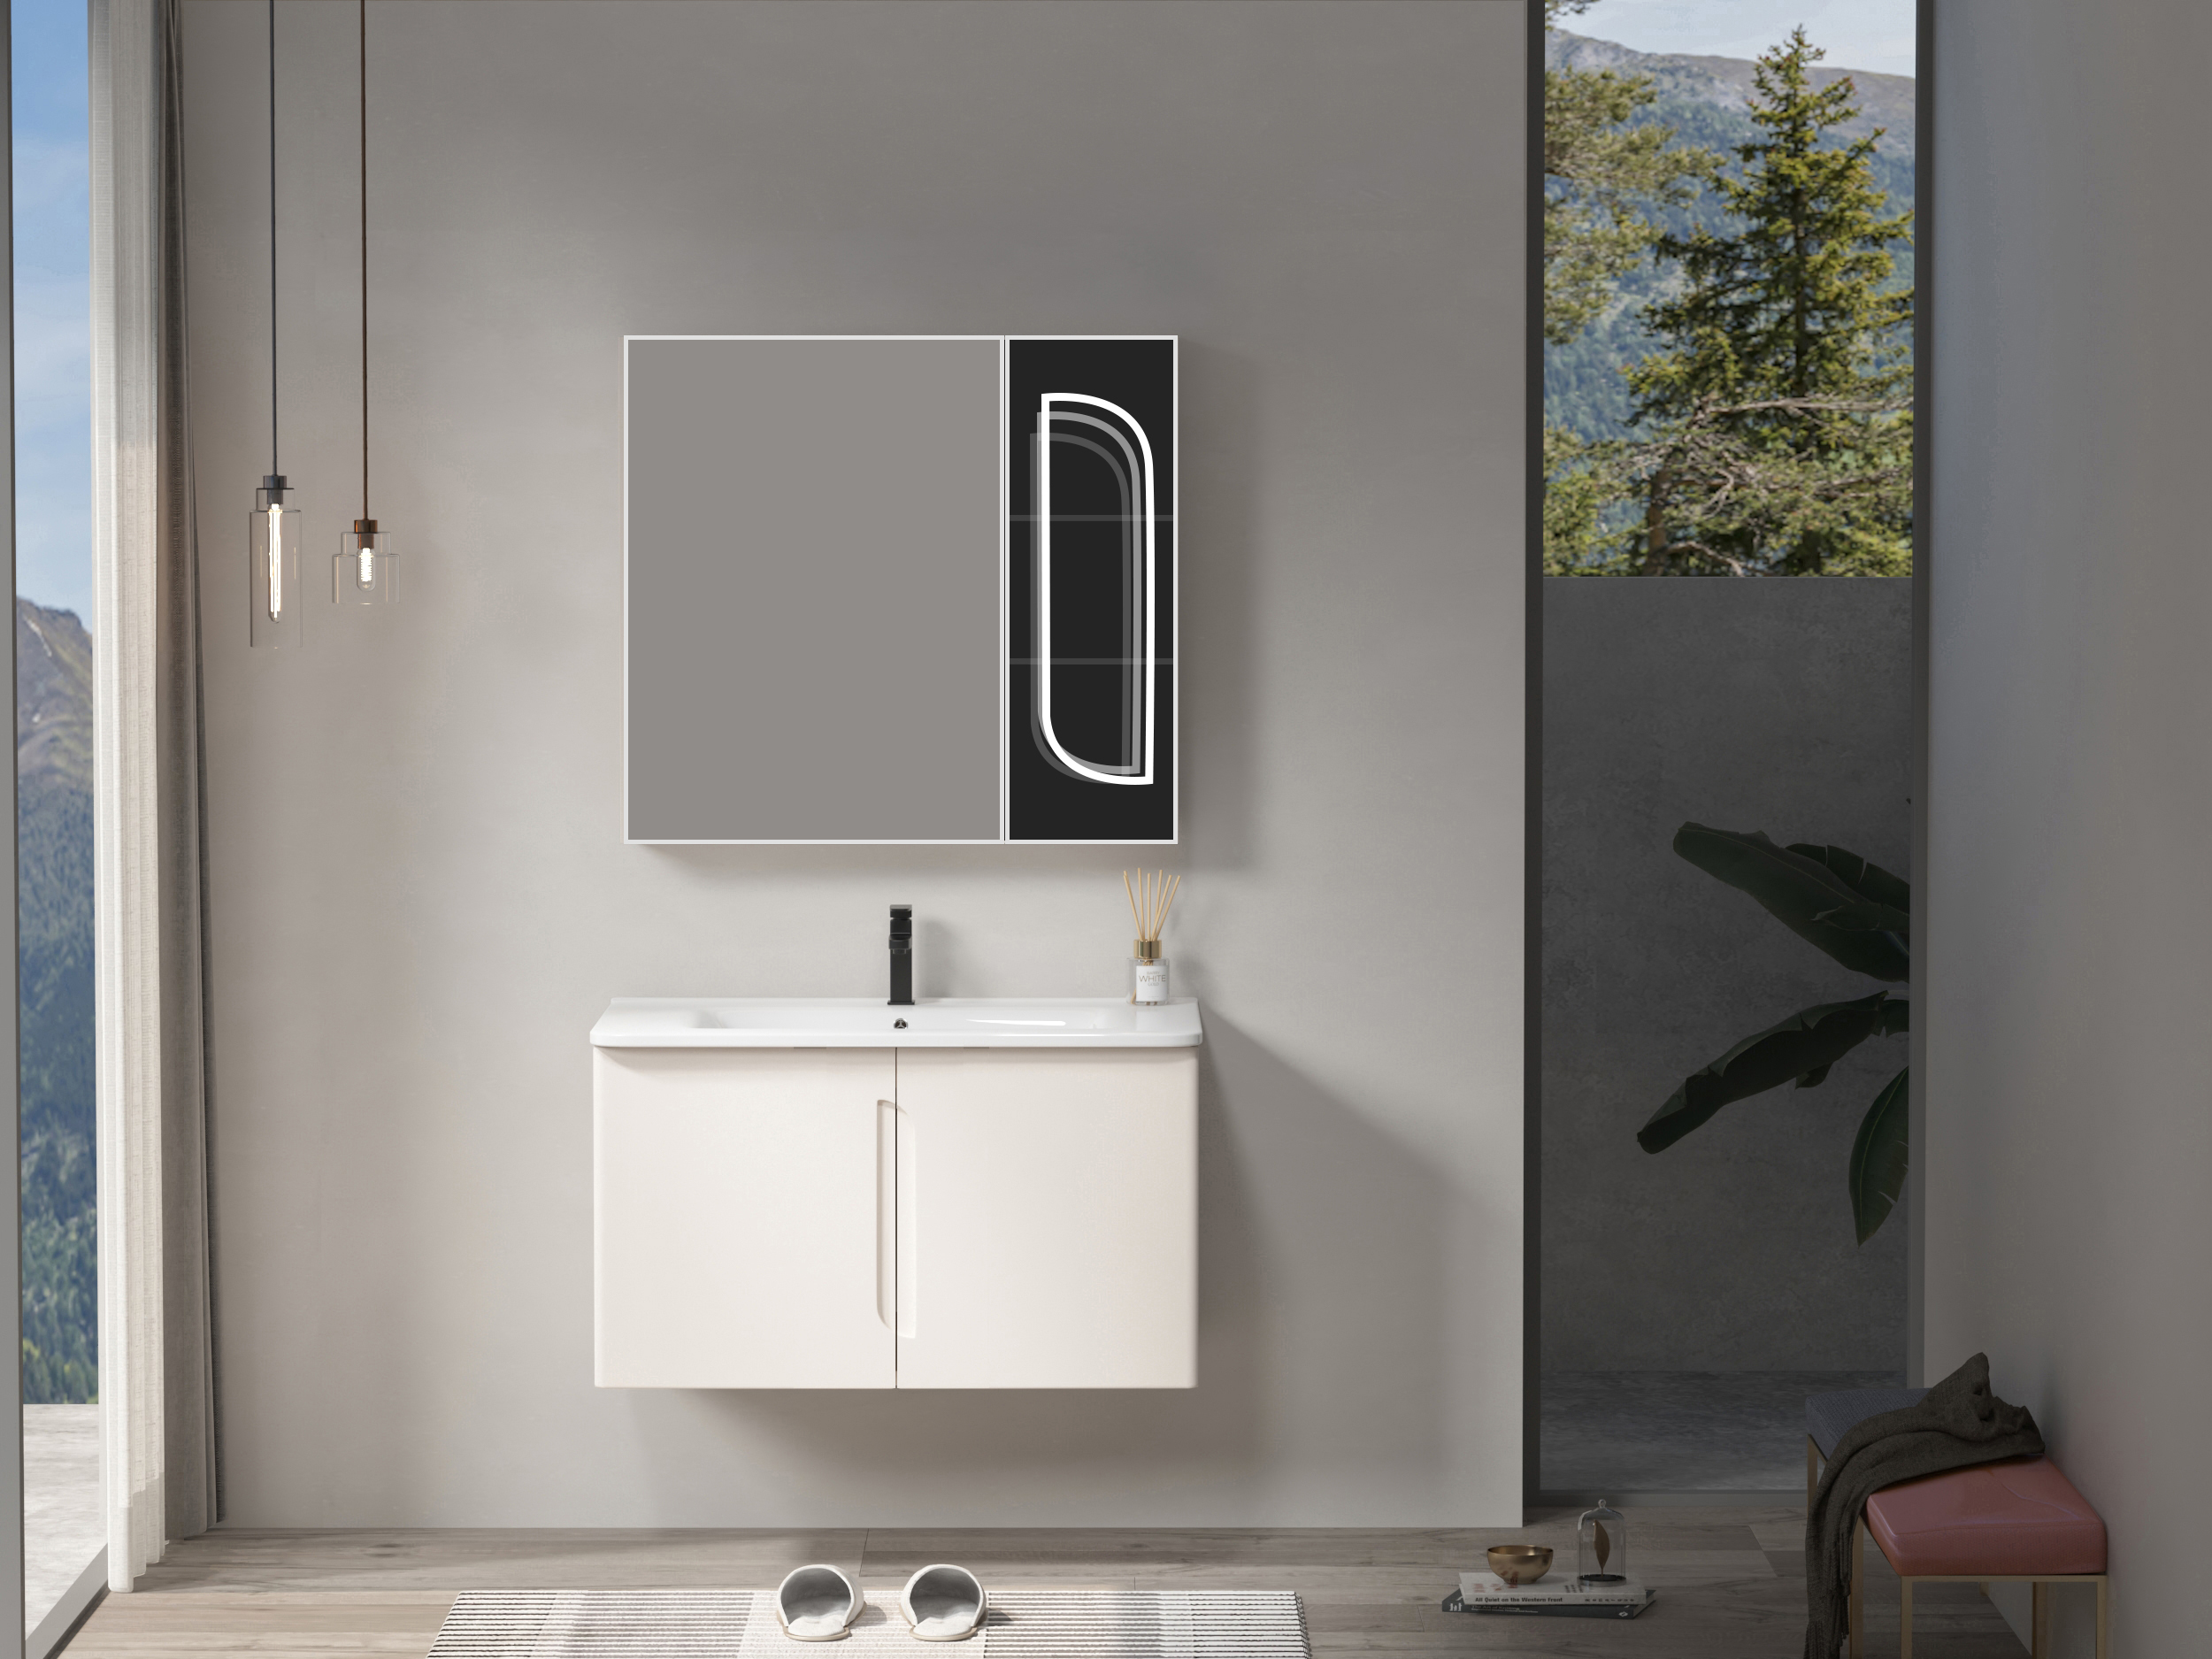 Aigao Smart Home Series- T0308 Multi-functional Smart Bathroom Cabinet